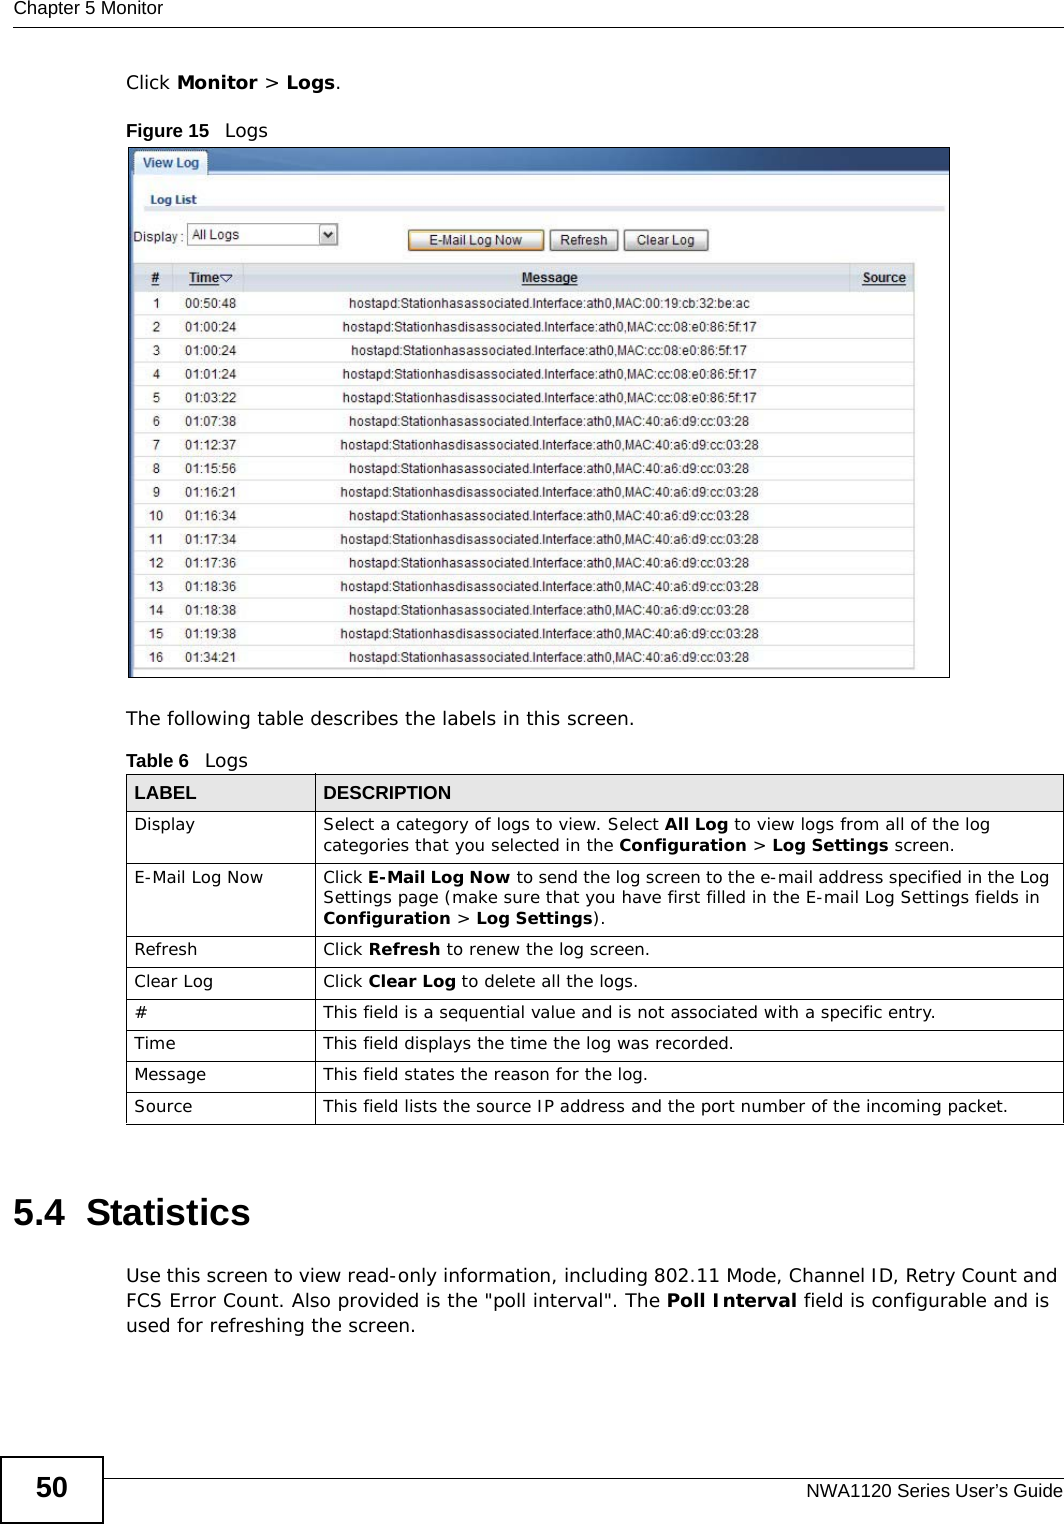 Chapter 5 MonitorNWA1120 Series User’s Guide50Click Monitor &gt; Logs.Figure 15   Logs The following table describes the labels in this screen. 5.4  StatisticsUse this screen to view read-only information, including 802.11 Mode, Channel ID, Retry Count and FCS Error Count. Also provided is the &quot;poll interval&quot;. The Poll Interval field is configurable and is used for refreshing the screen.Table 6   LogsLABEL DESCRIPTIONDisplay  Select a category of logs to view. Select All Log to view logs from all of the log categories that you selected in the Configuration &gt; Log Settings screen.E-Mail Log Now Click E-Mail Log Now to send the log screen to the e-mail address specified in the Log Settings page (make sure that you have first filled in the E-mail Log Settings fields in Configuration &gt; Log Settings).Refresh Click Refresh to renew the log screen. Clear Log Click Clear Log to delete all the logs. #This field is a sequential value and is not associated with a specific entry.Time  This field displays the time the log was recorded. Message This field states the reason for the log.Source This field lists the source IP address and the port number of the incoming packet.